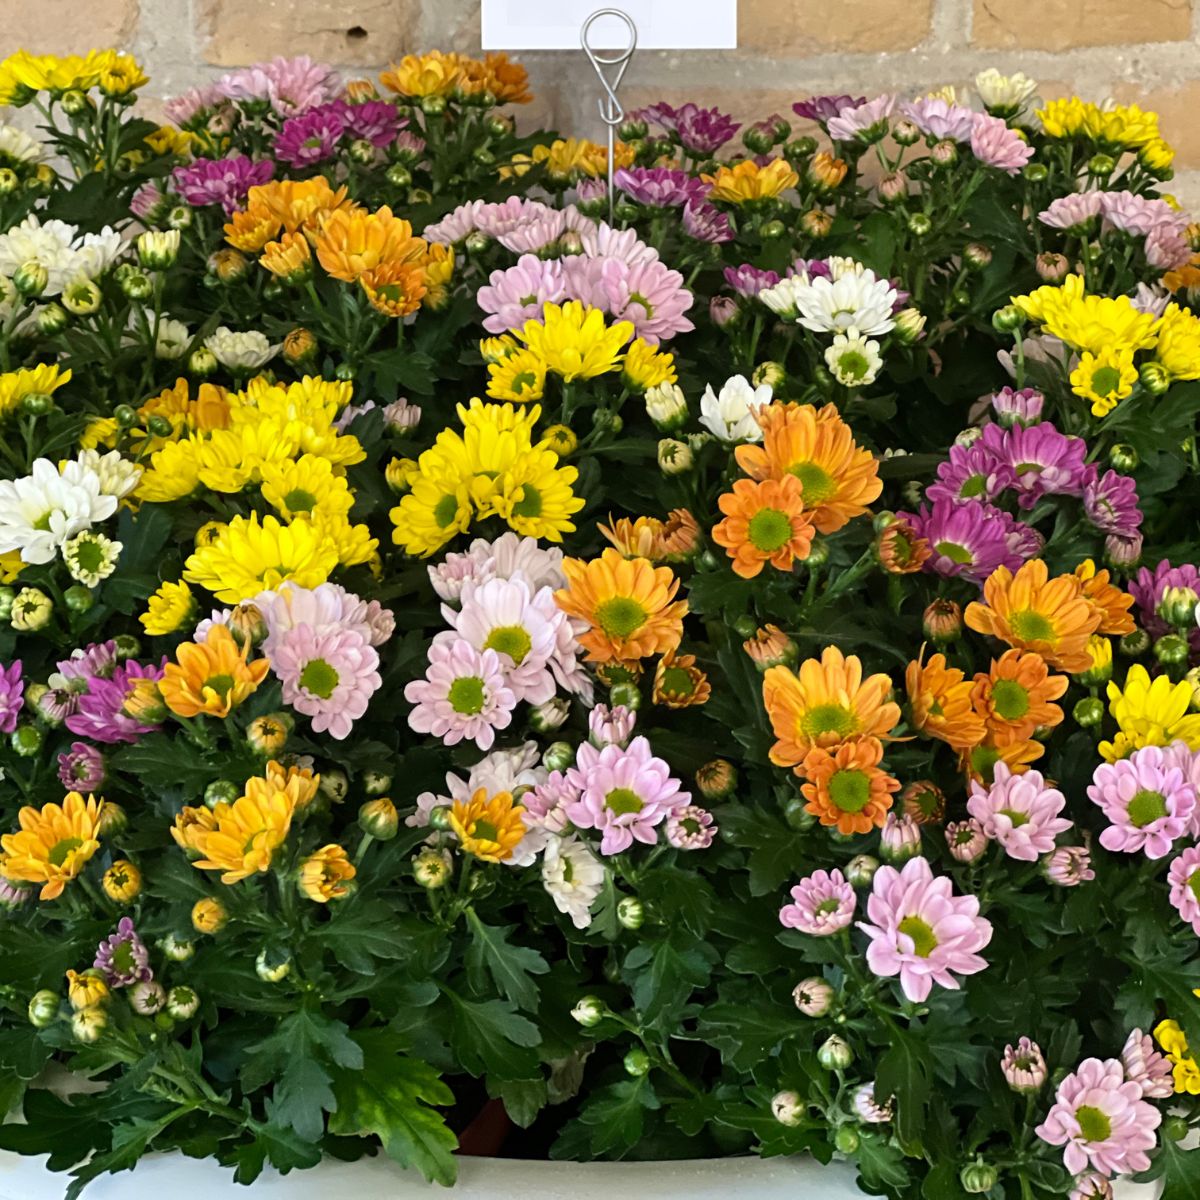 Mixed colors of Santini Rossi used as pot plants on Thursd